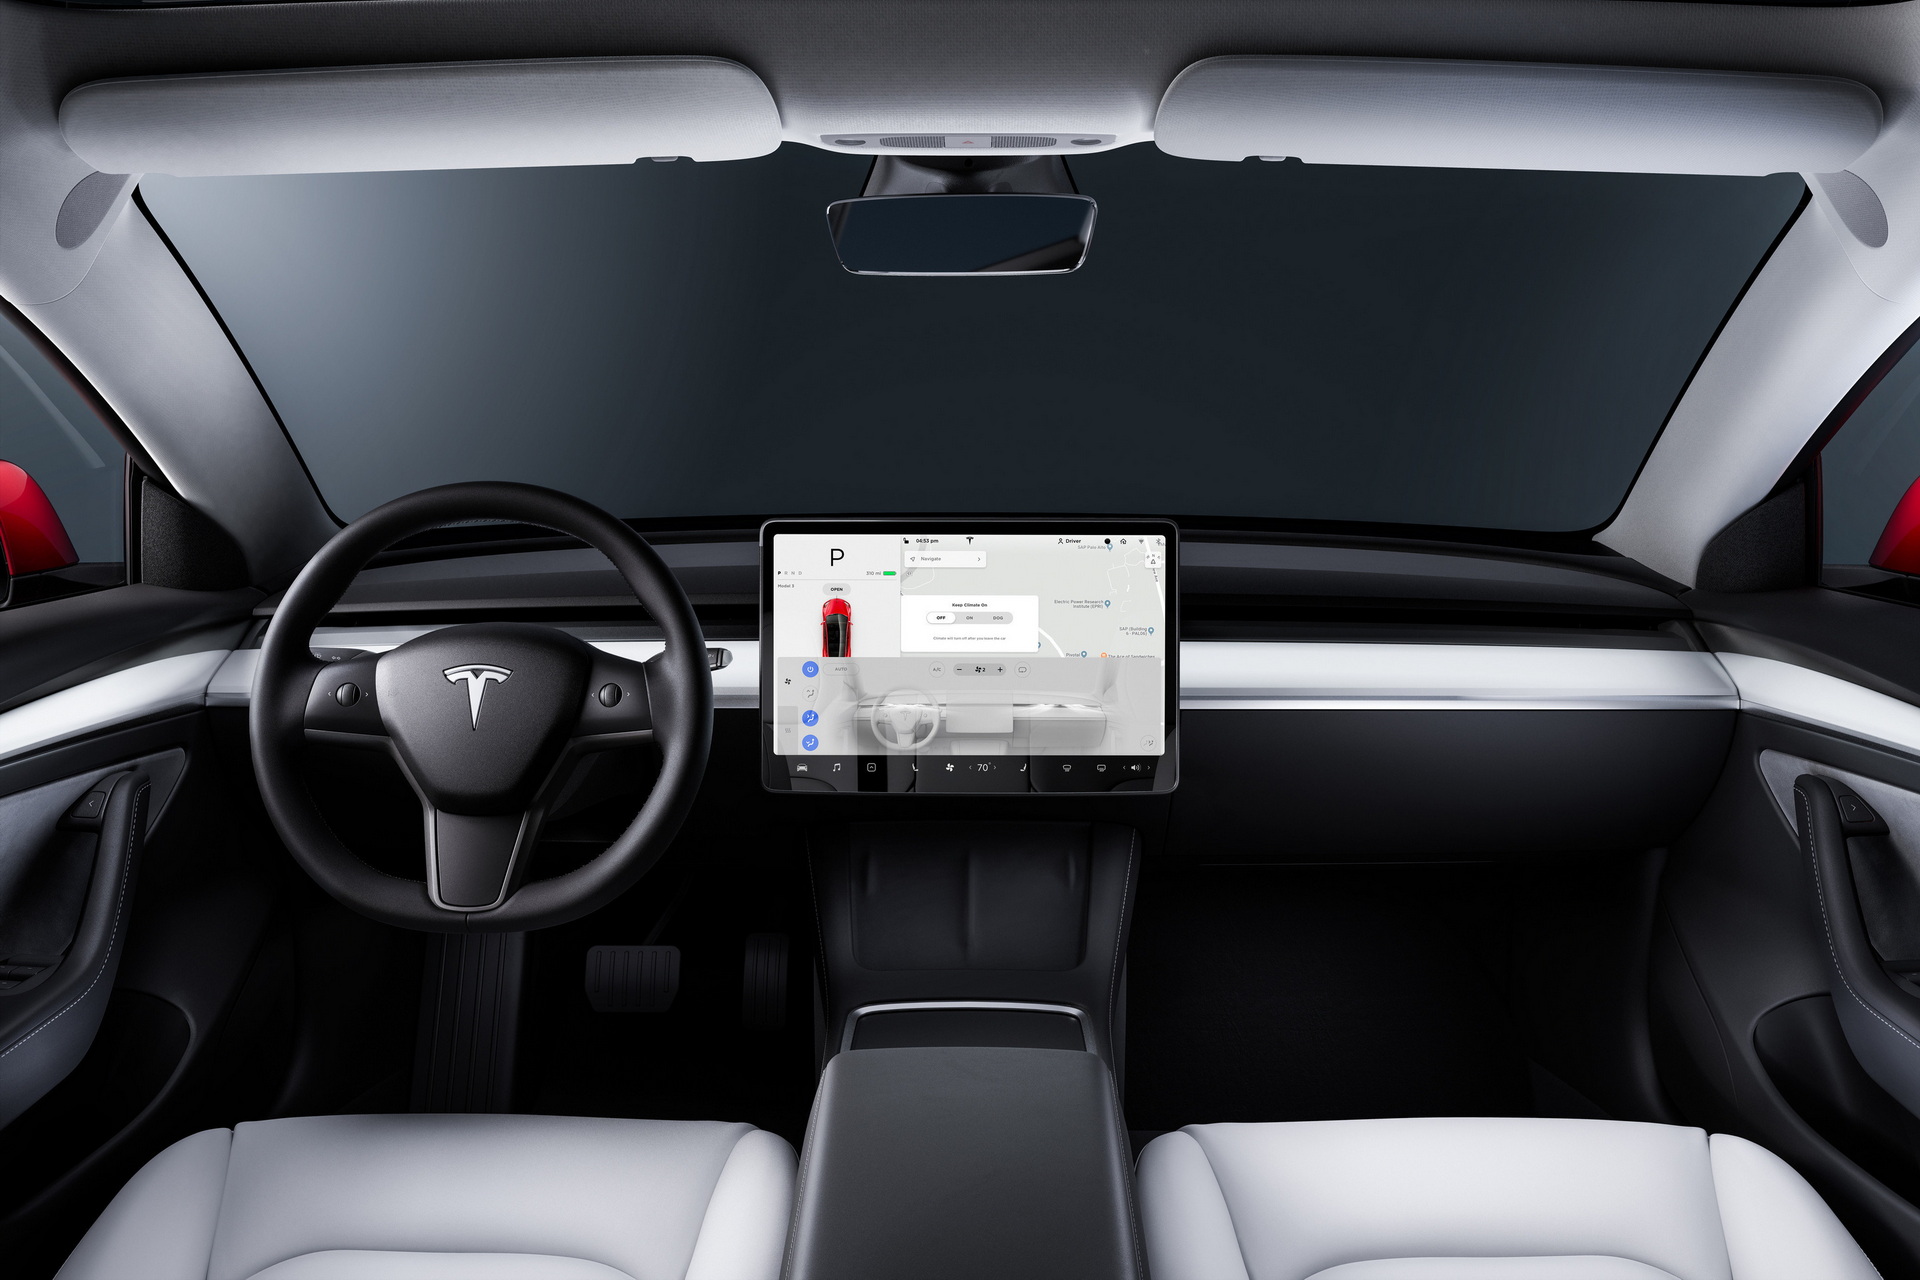 2024 Tesla Model 3 Facelift With An Even More Simplified Interior